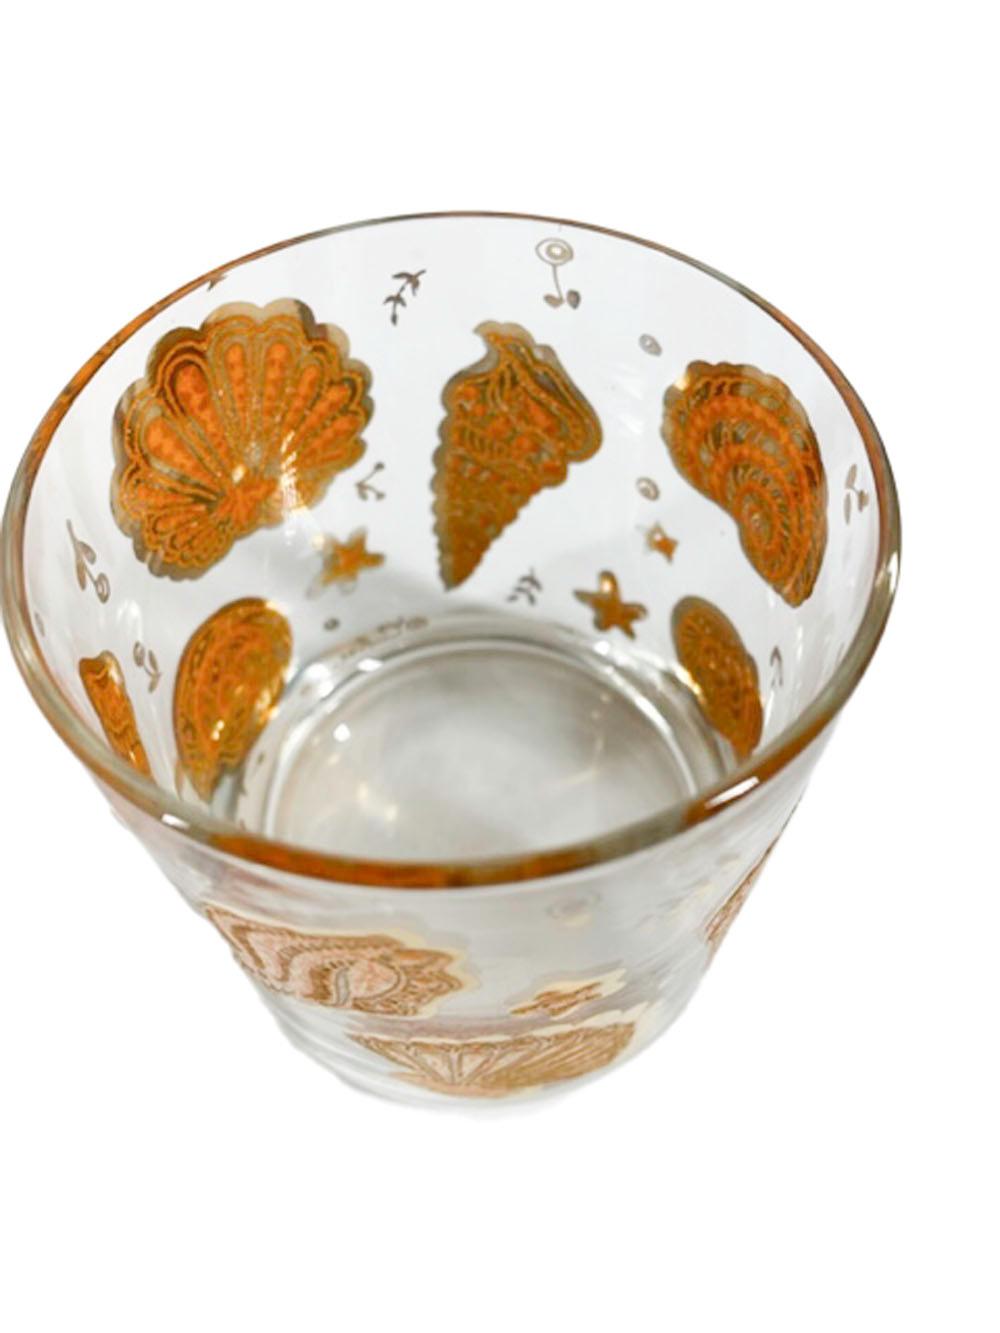 Four Culver Glassware Rocks Glasses in the Gold & Orange Marina Pattern In Good Condition For Sale In Nantucket, MA